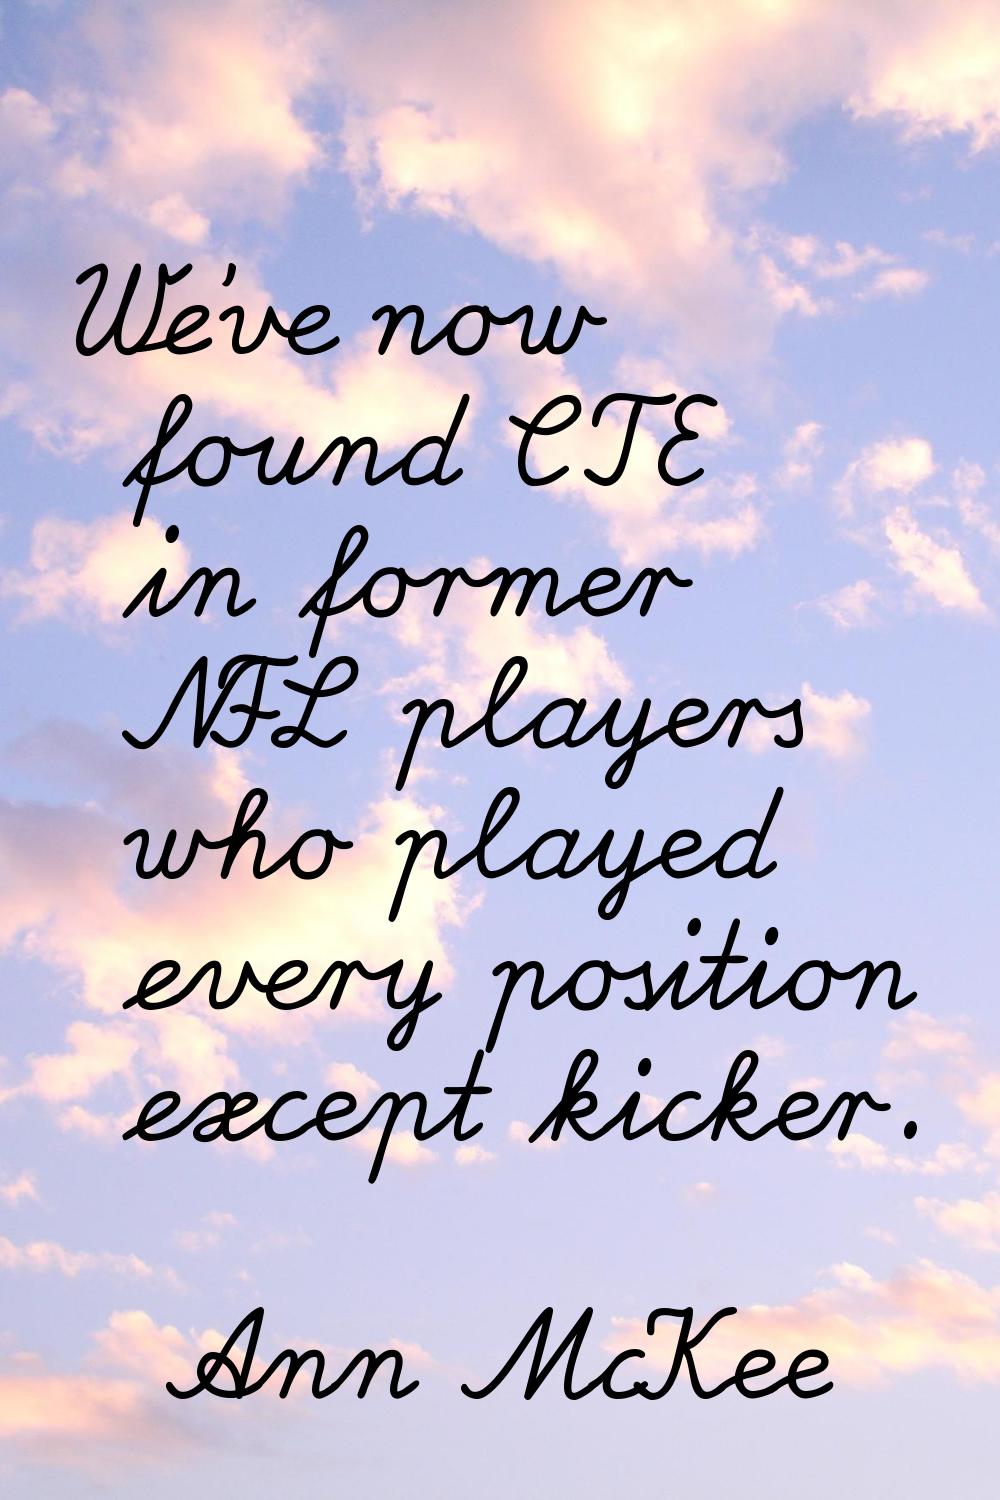 We've now found CTE in former NFL players who played every position except kicker.